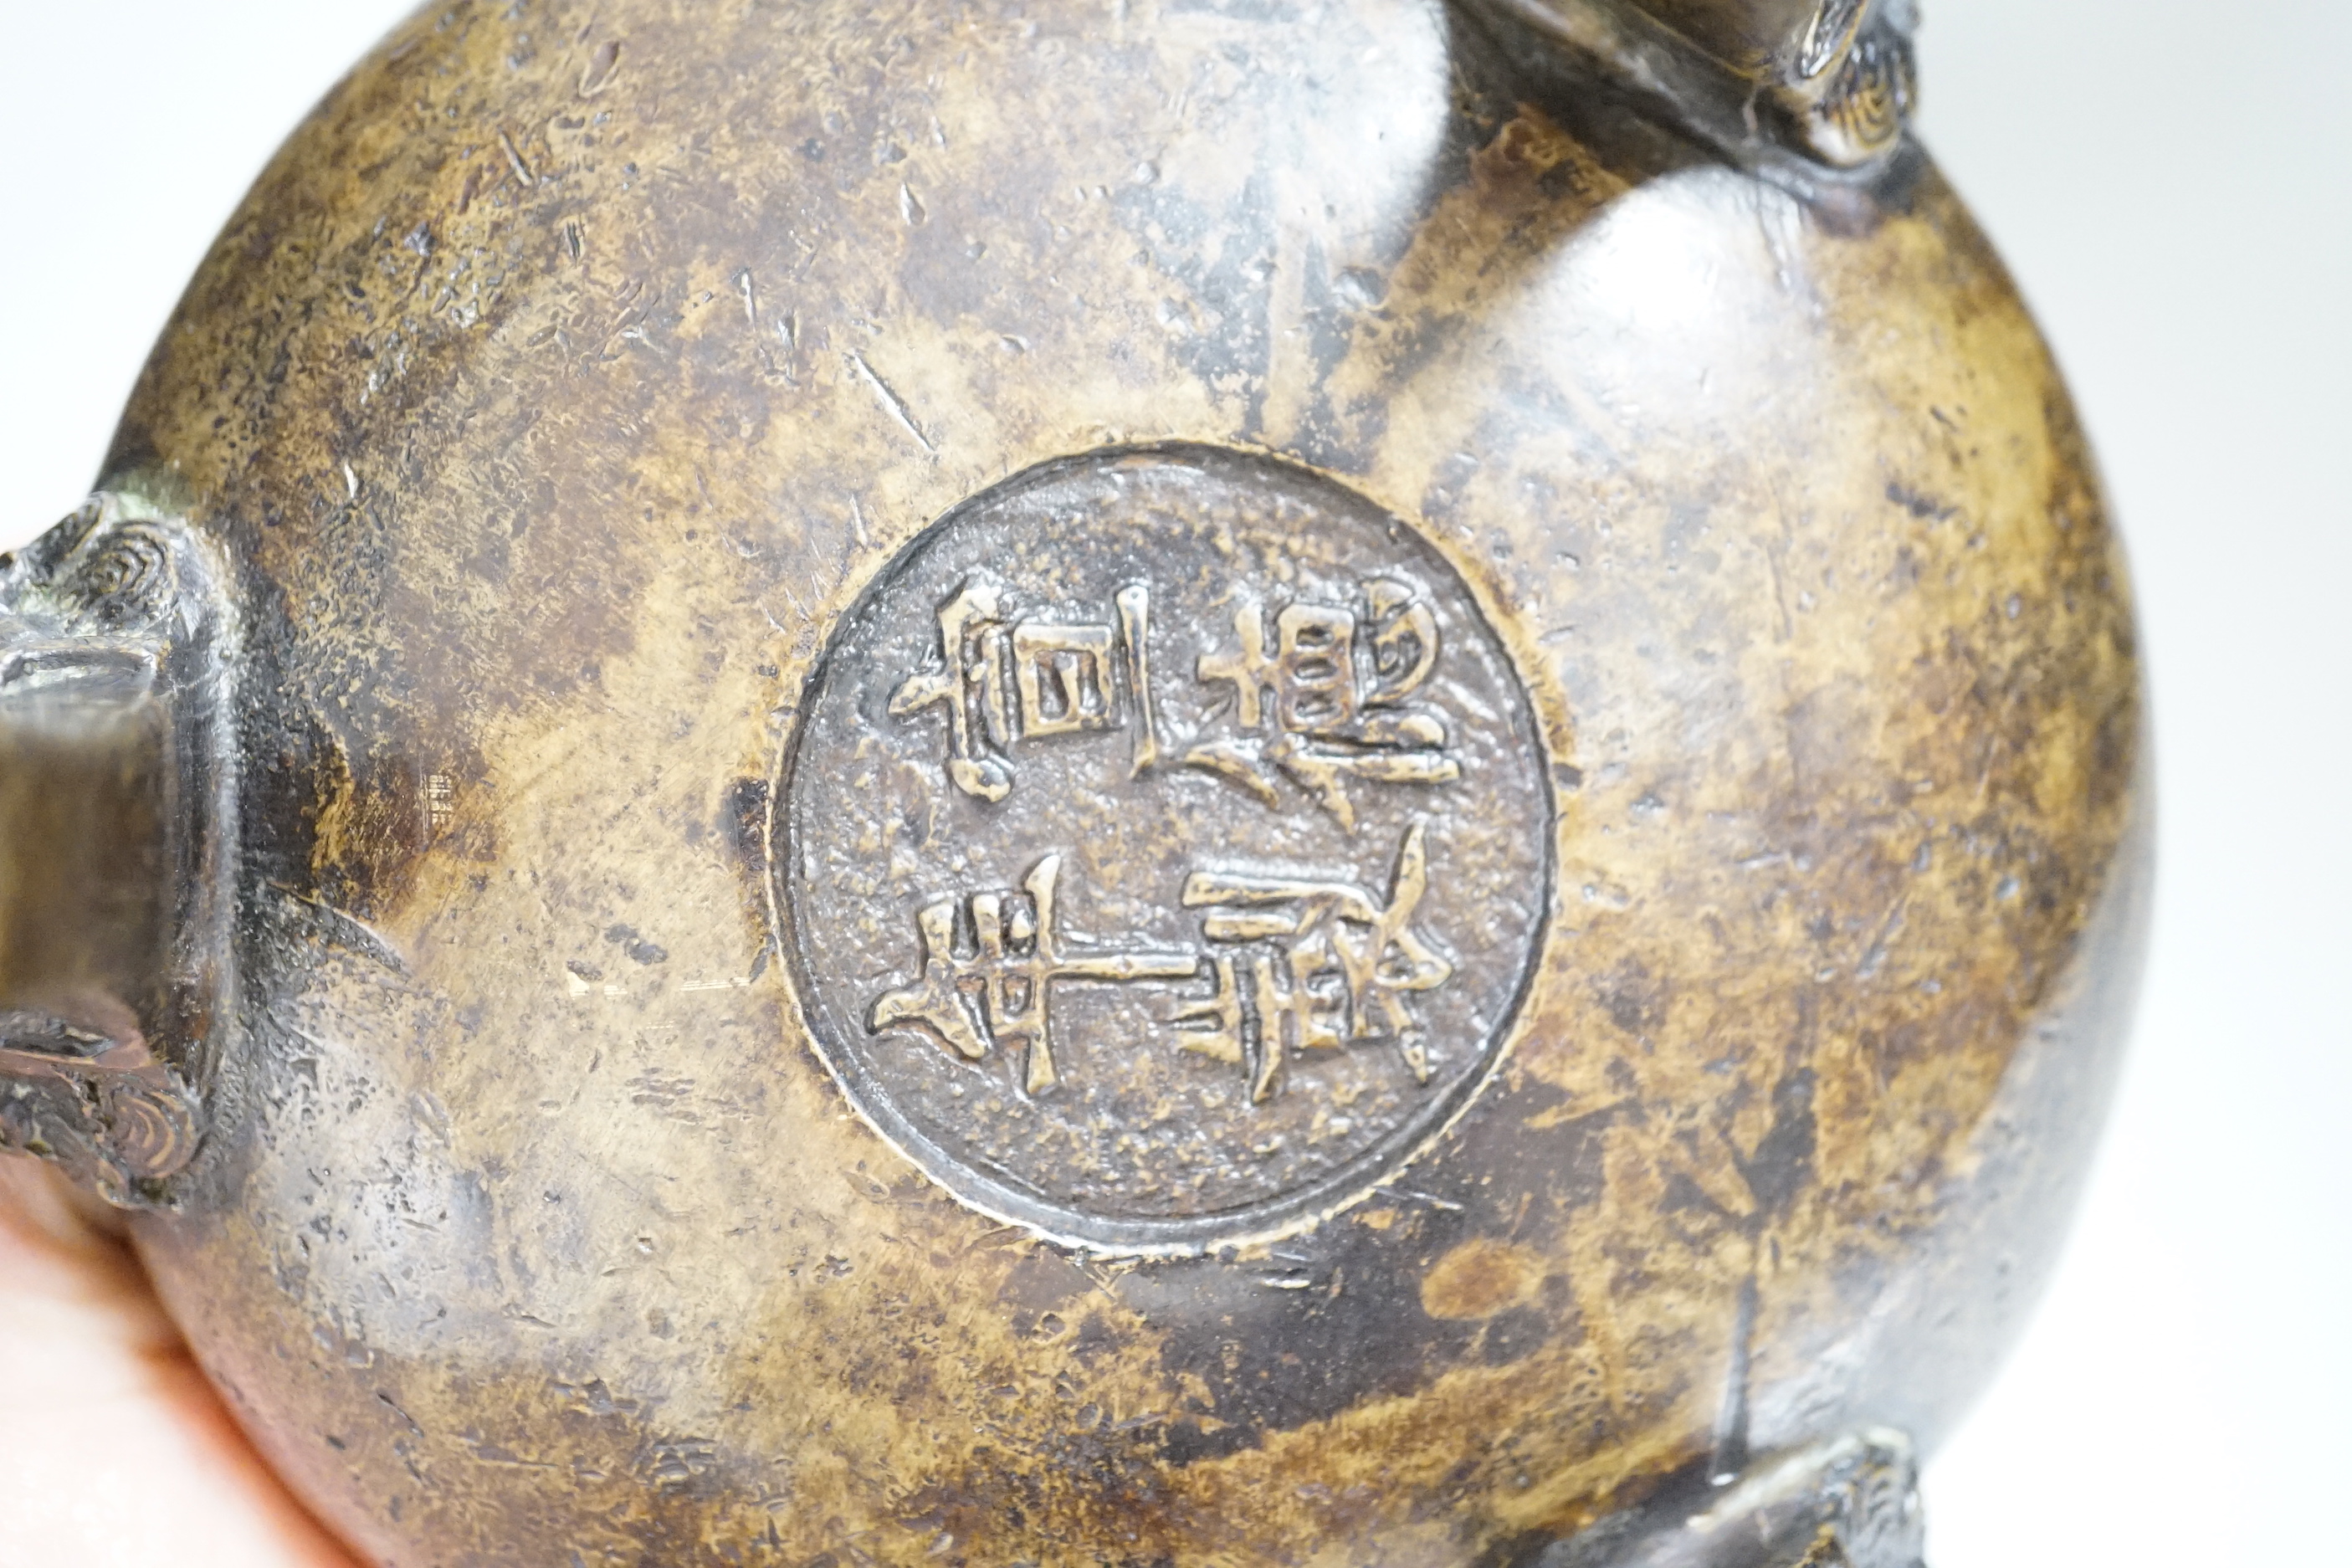 A Chinese bronze censer, 15cm high and a Chinese brass bowl, 13cms high